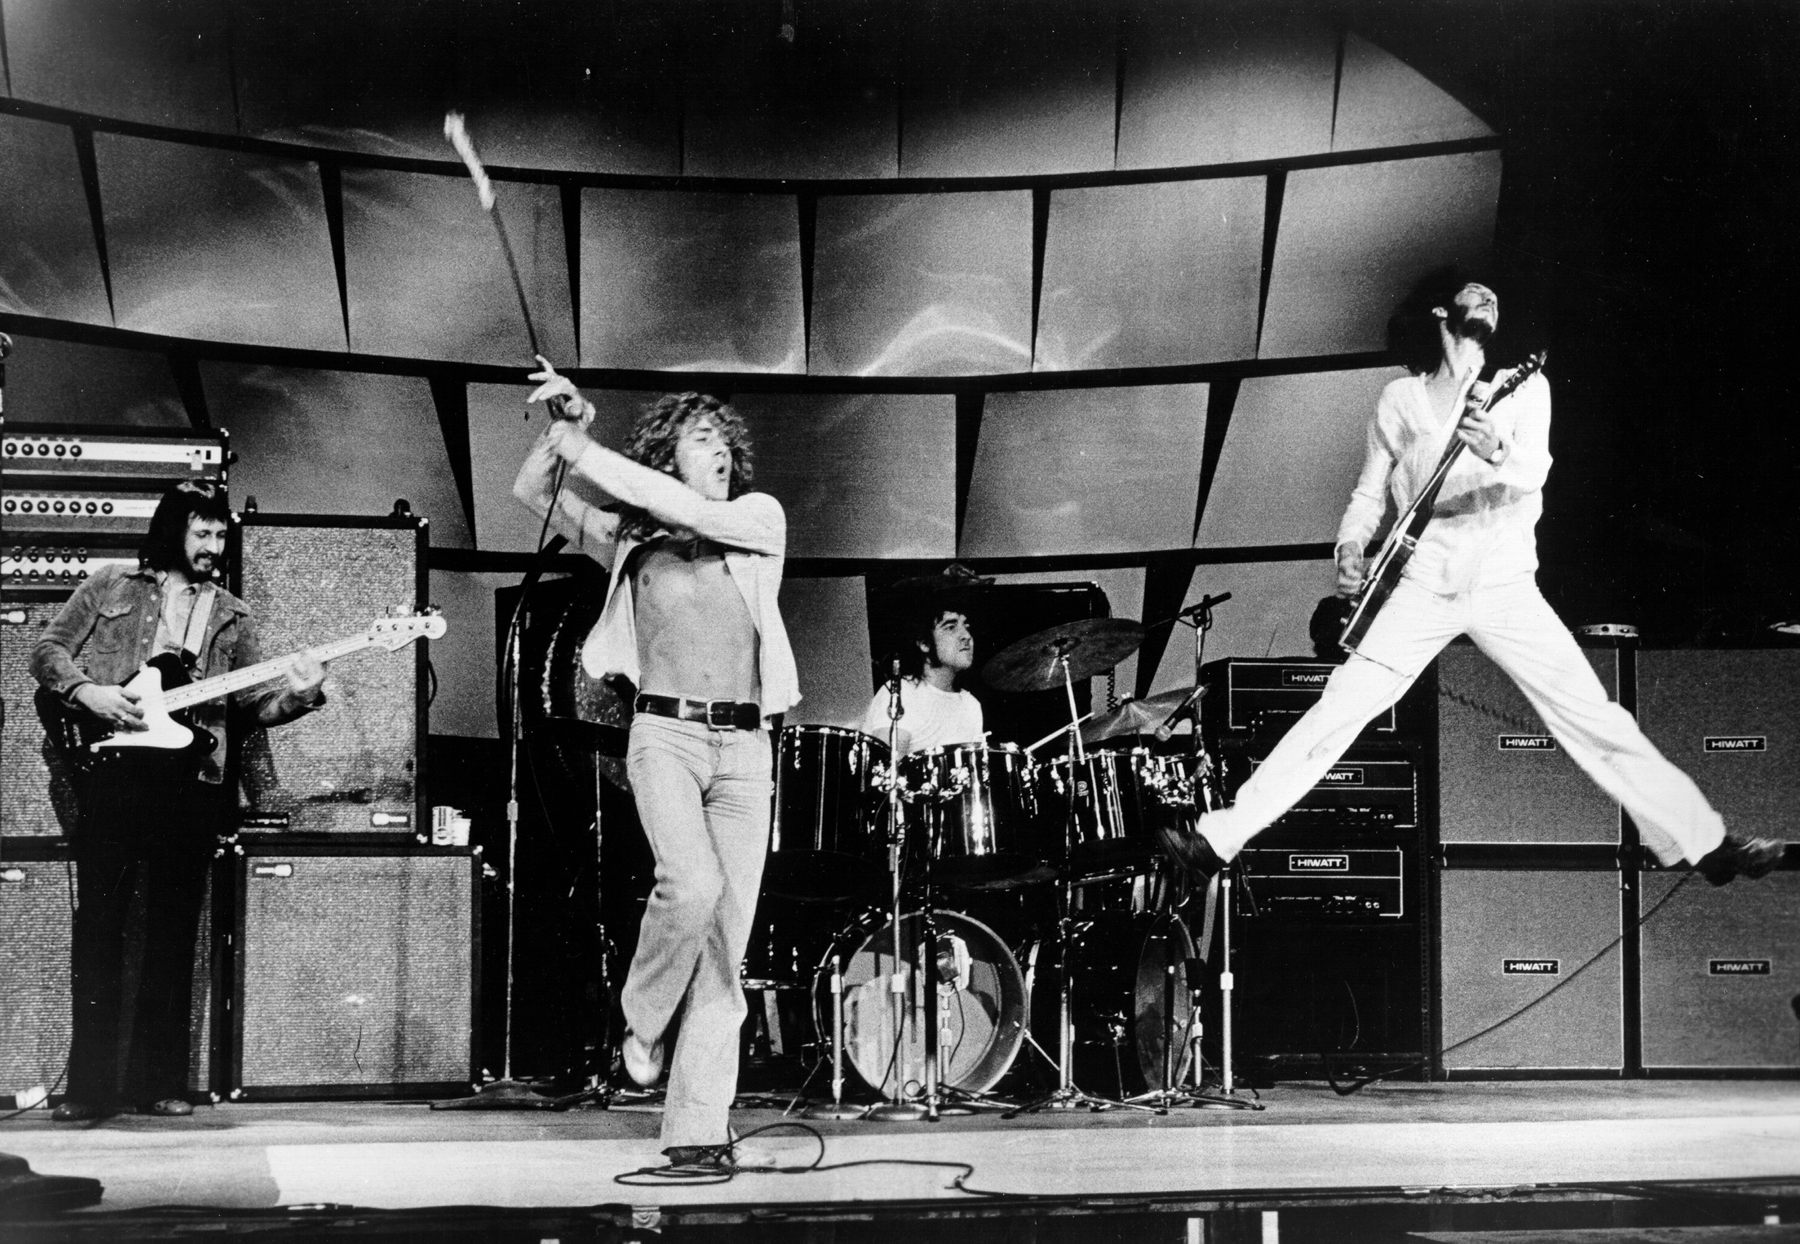 The Who in a typical action shot, Pete off the ground, Roger swinging Microphone, Keith flying around the kit, and John being John, just playing hi bass.